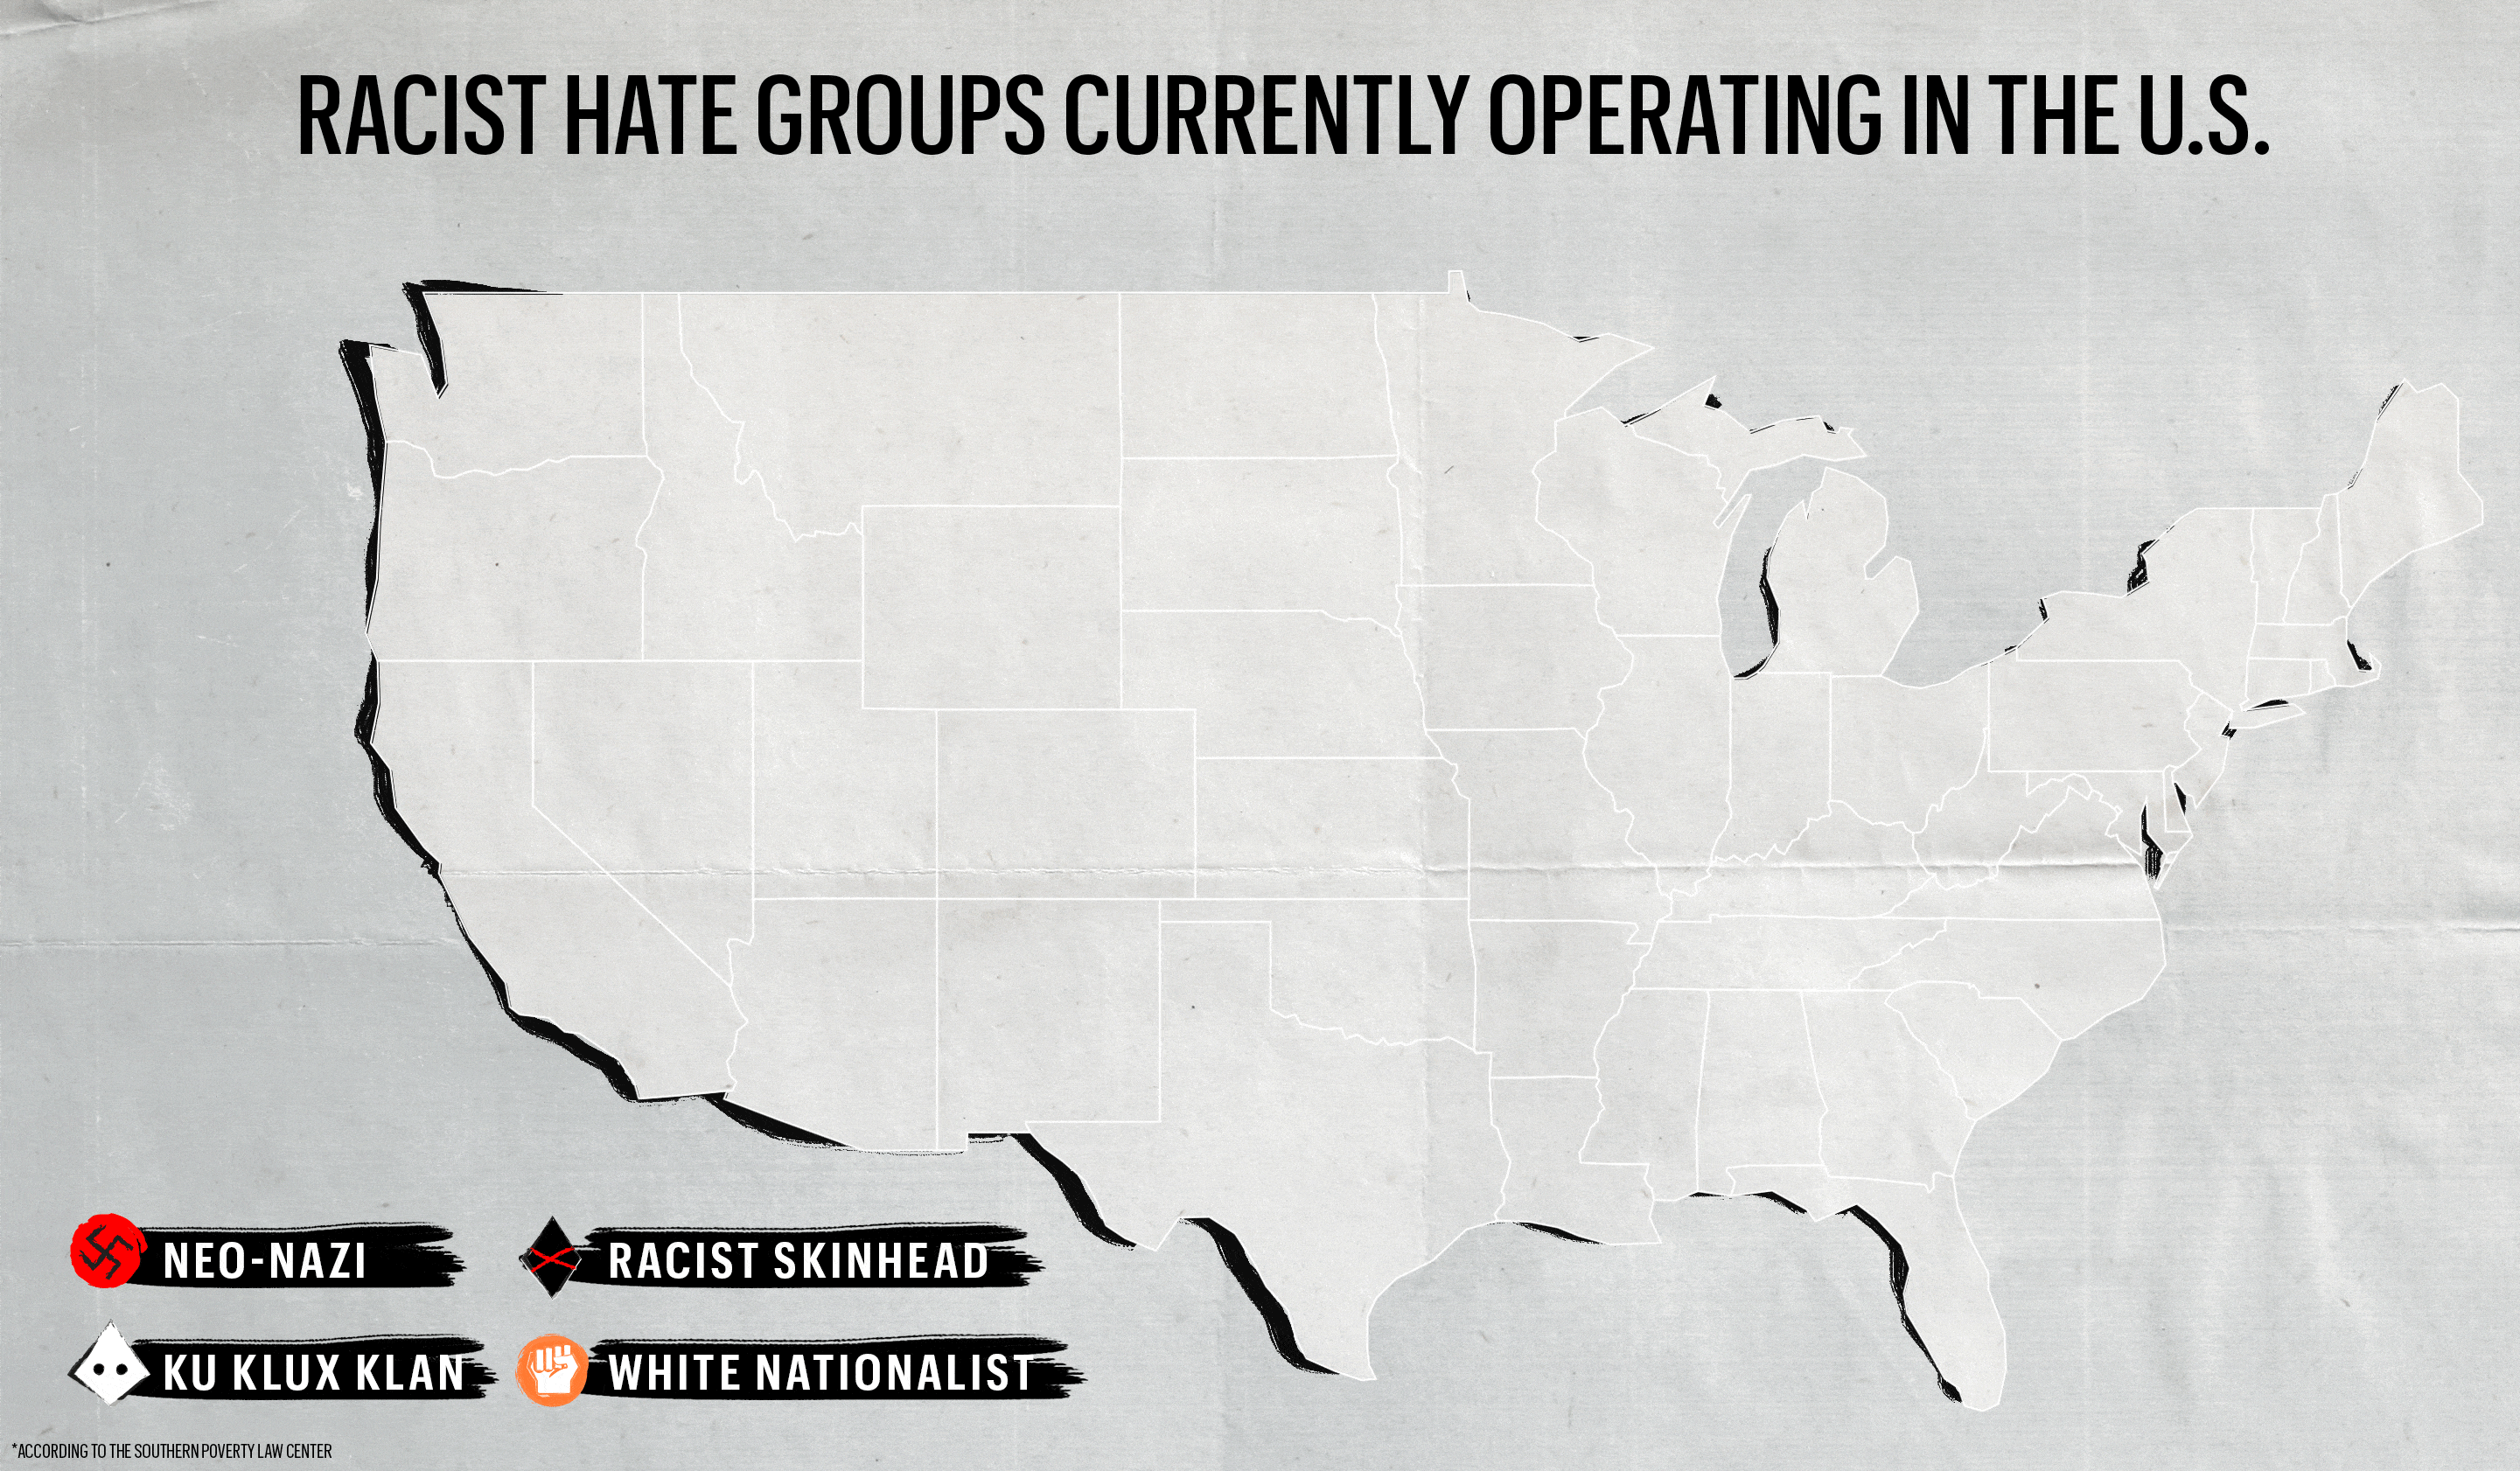 An animated map of the United States showing active race-hate groups